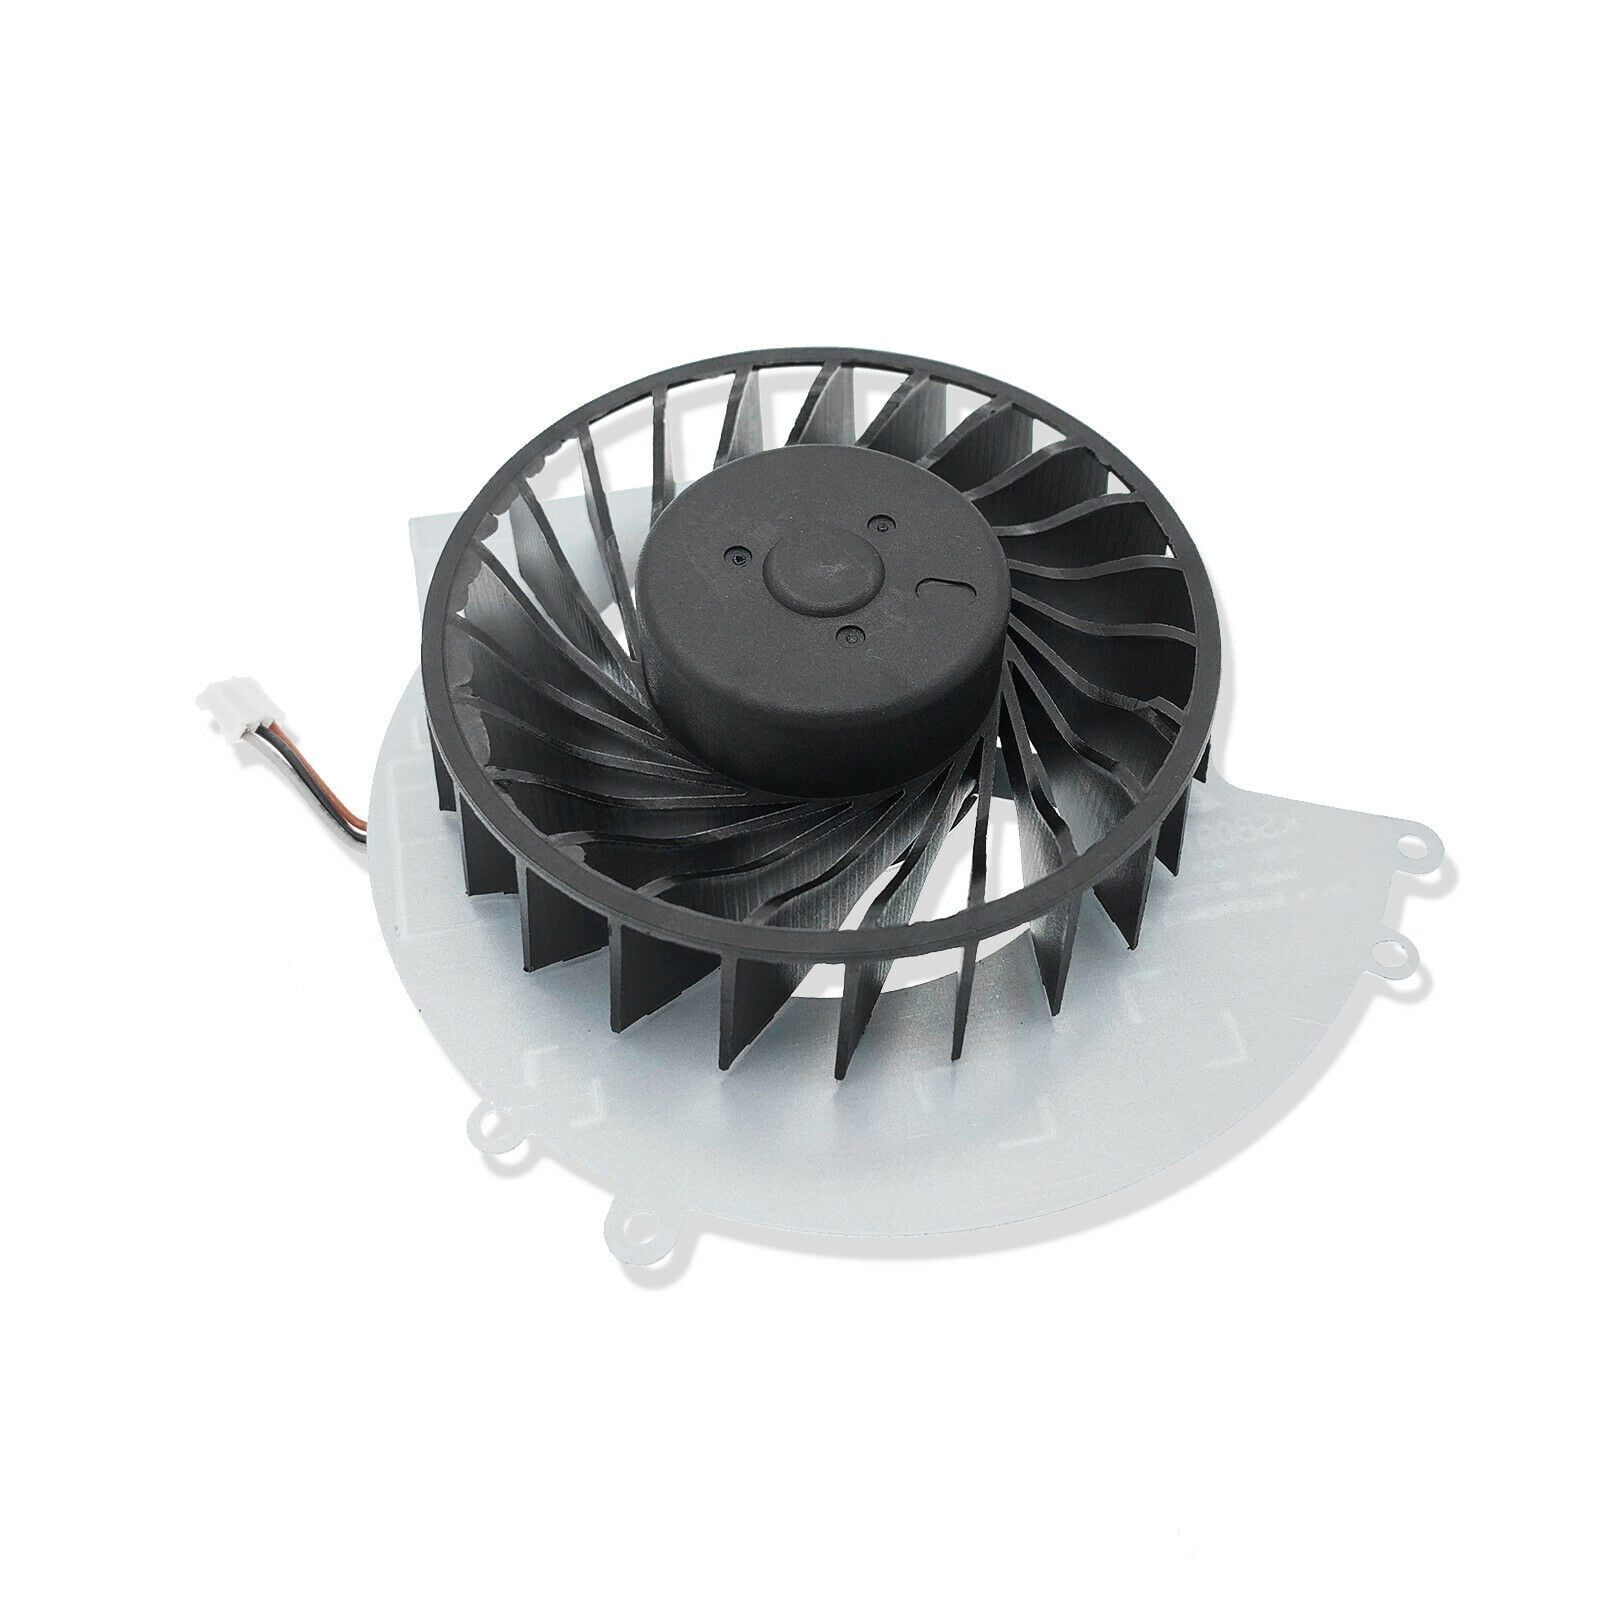 regional provokere skarp New Internal Replacement CPU Cooling Fan for Sony PS4 4 CUH-1216A CUH-1216B  - Walmart.com